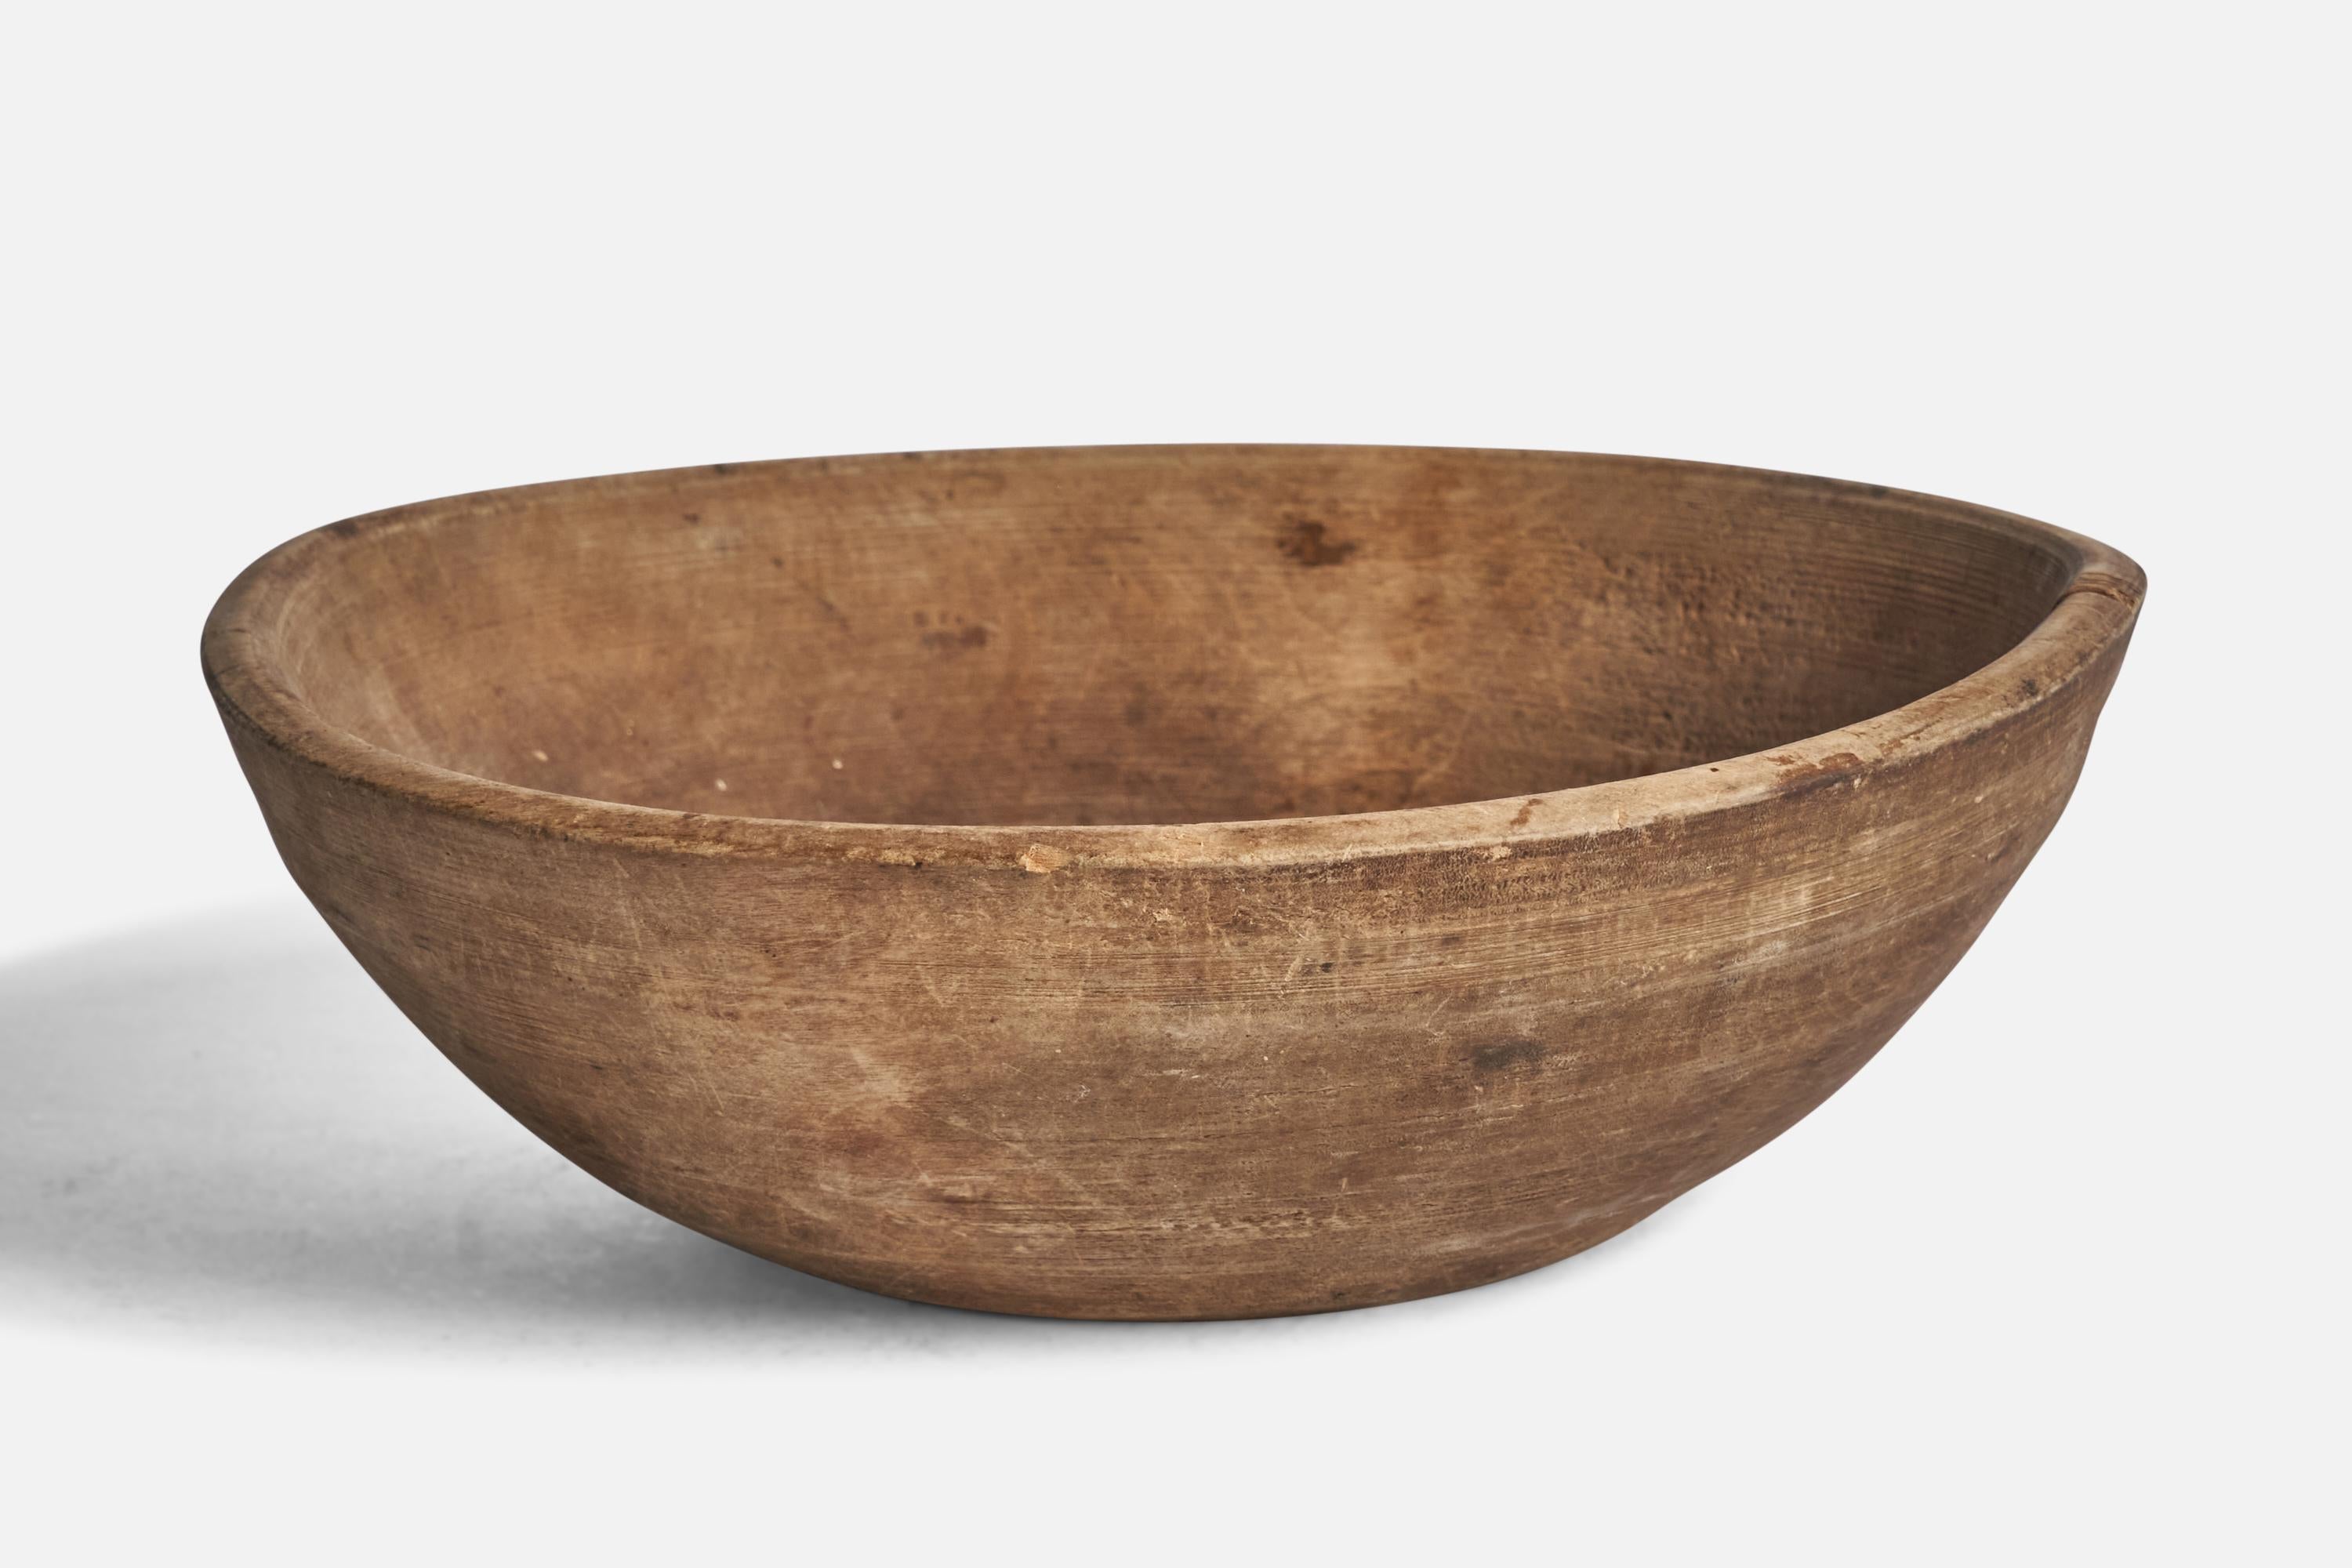 A wood bowl produced in Sweden, 19th century.